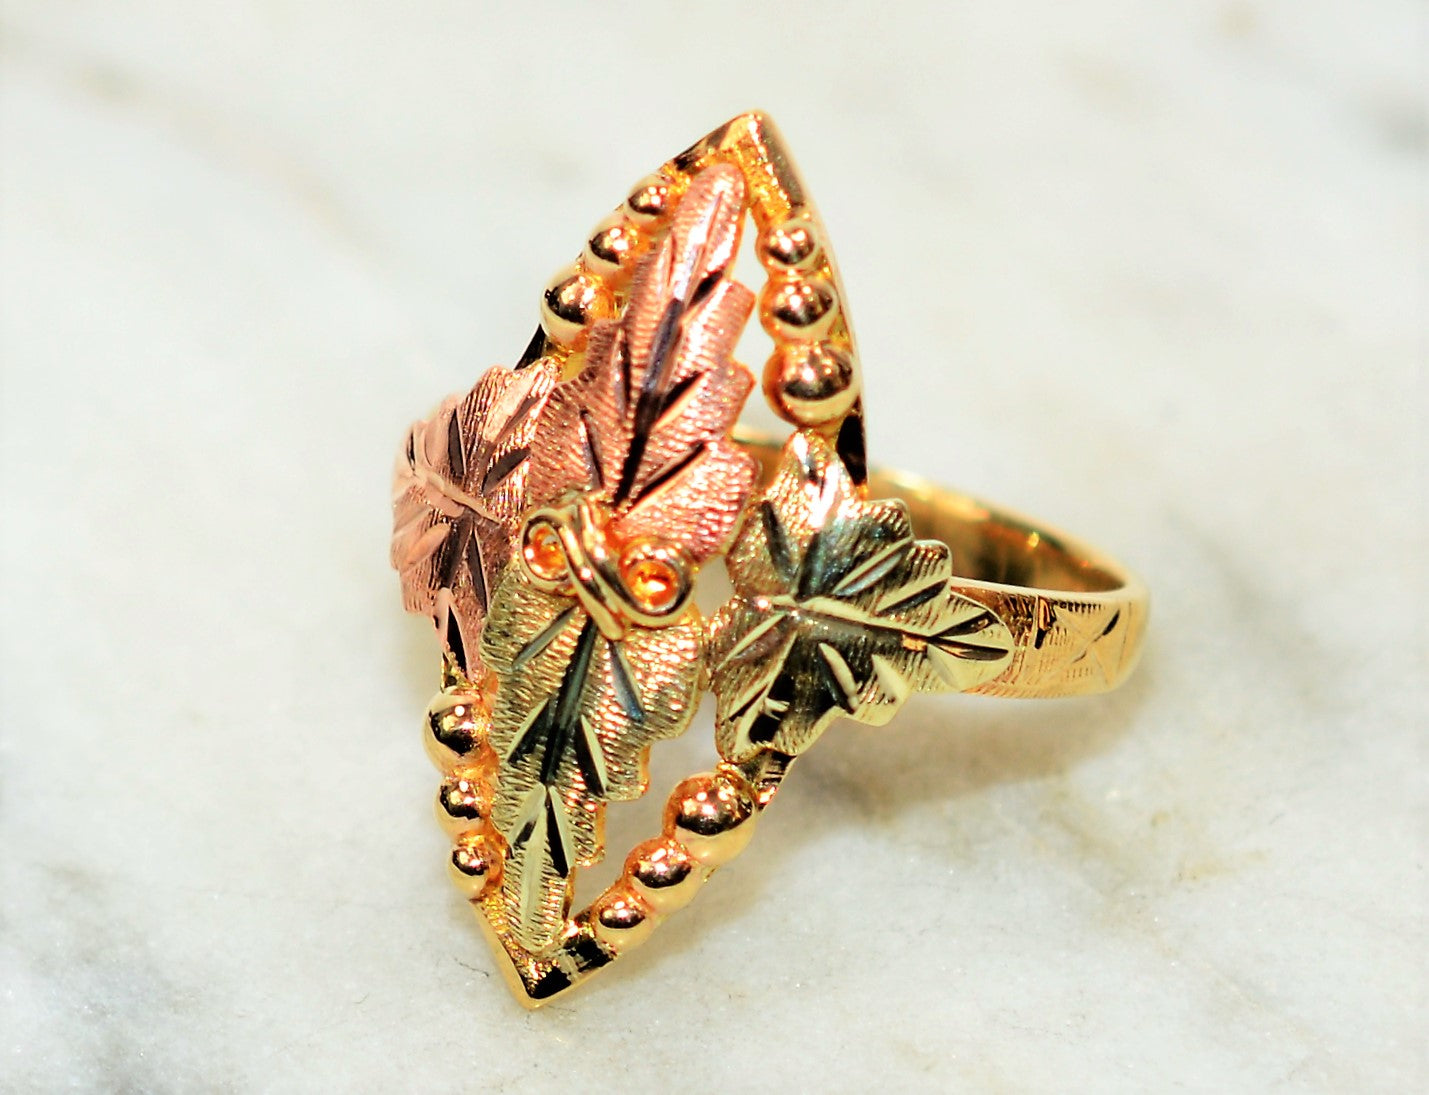 Black Hills Gold Ring 10K Solid Gold Ladies Ring Bohemian Ring Nature Jewelry USA Jewelry Leaf Ring Vine Ring No Stone Ring Women's Ring